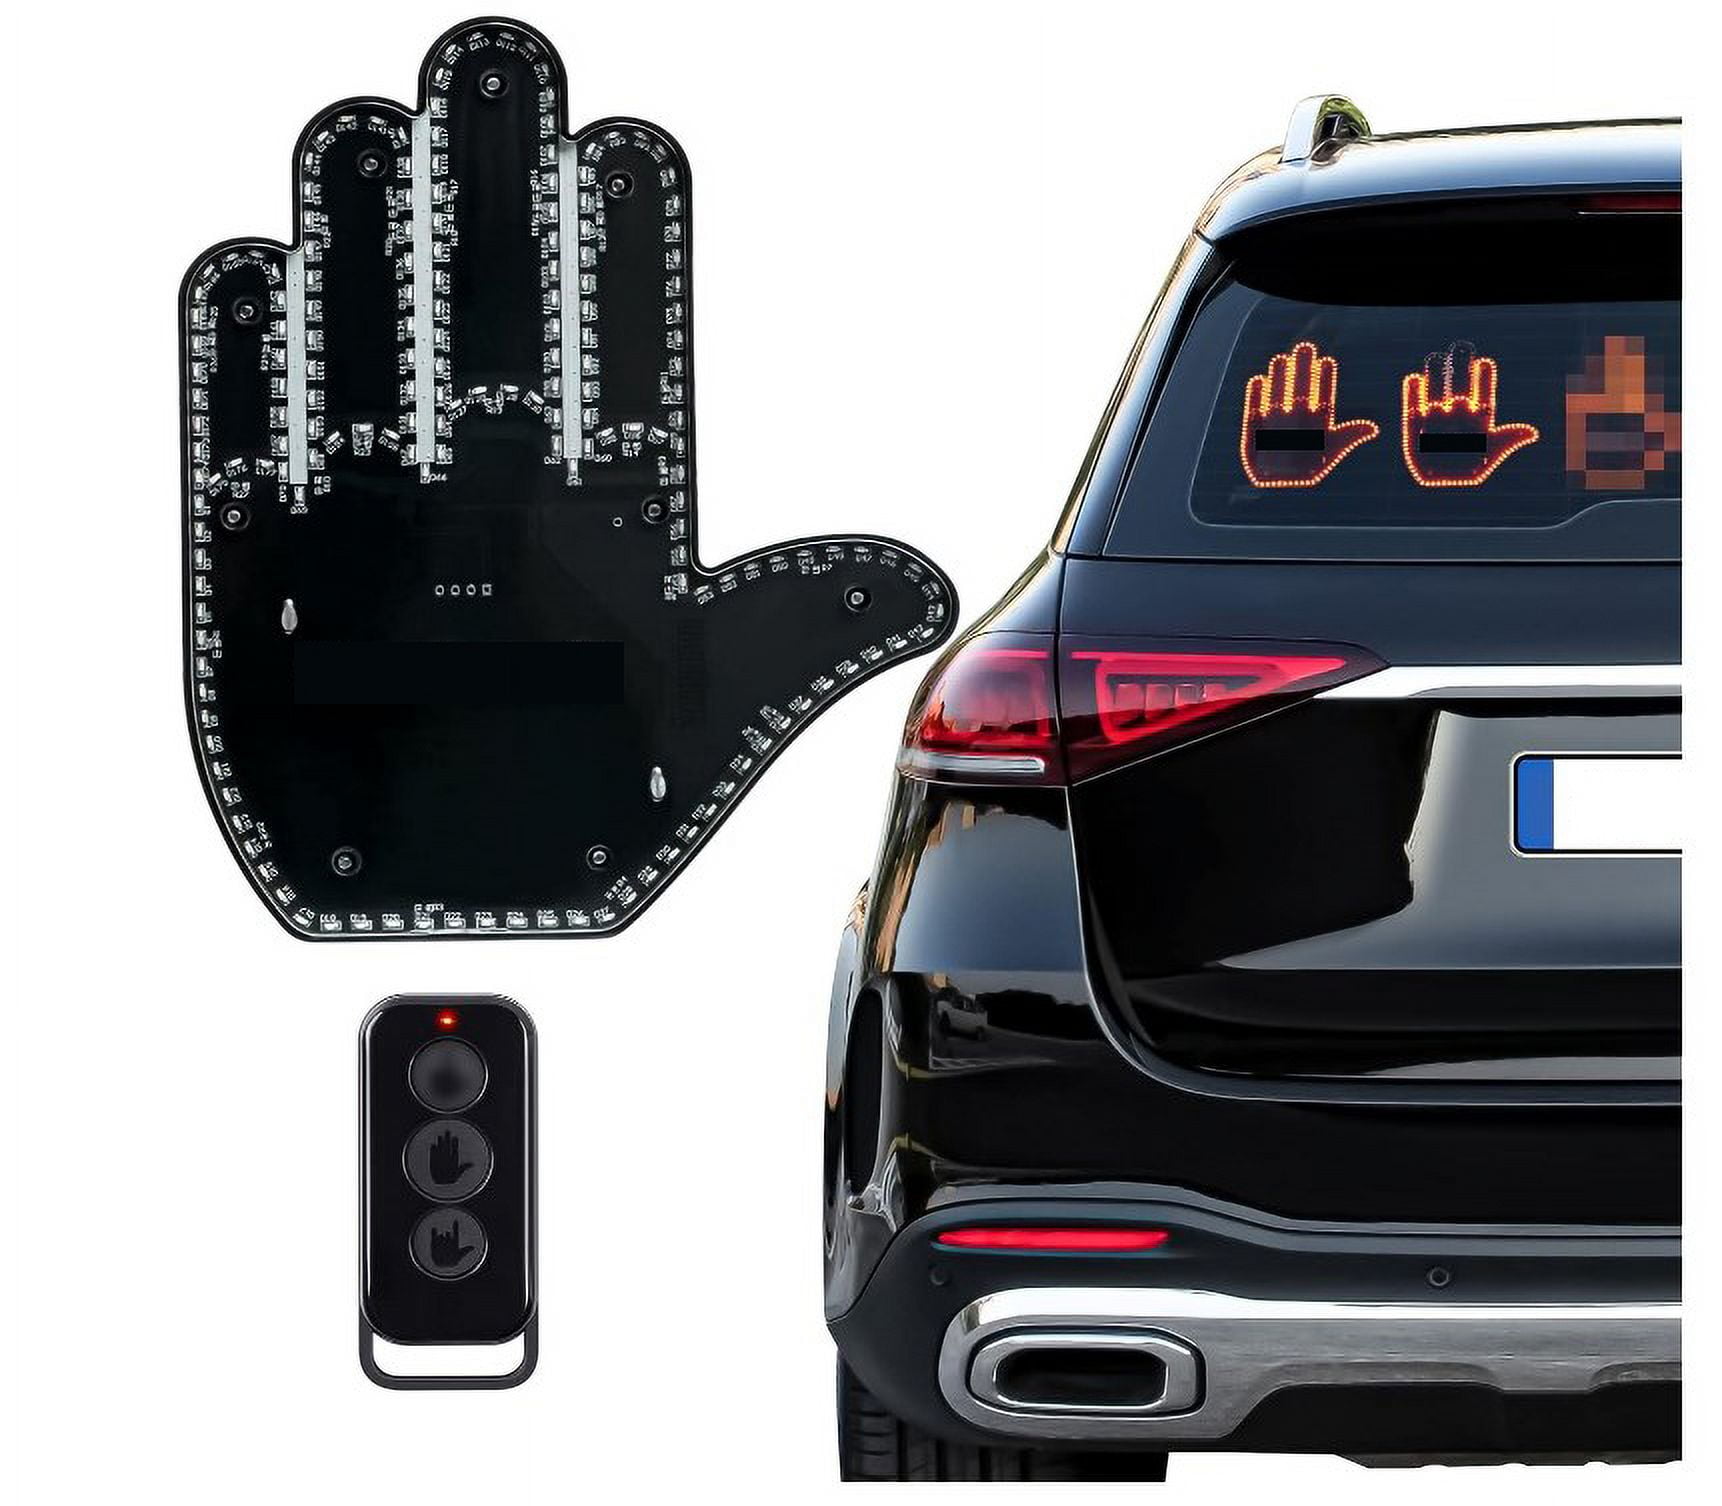  FLIK Original Middle Finger Light - Give The Bird & Wave to  Drivers - Hottest Gifted Car Accessories, Truck Accessories, Car Gadgets &  Road Rage Signs for Men, Women, & Teens 